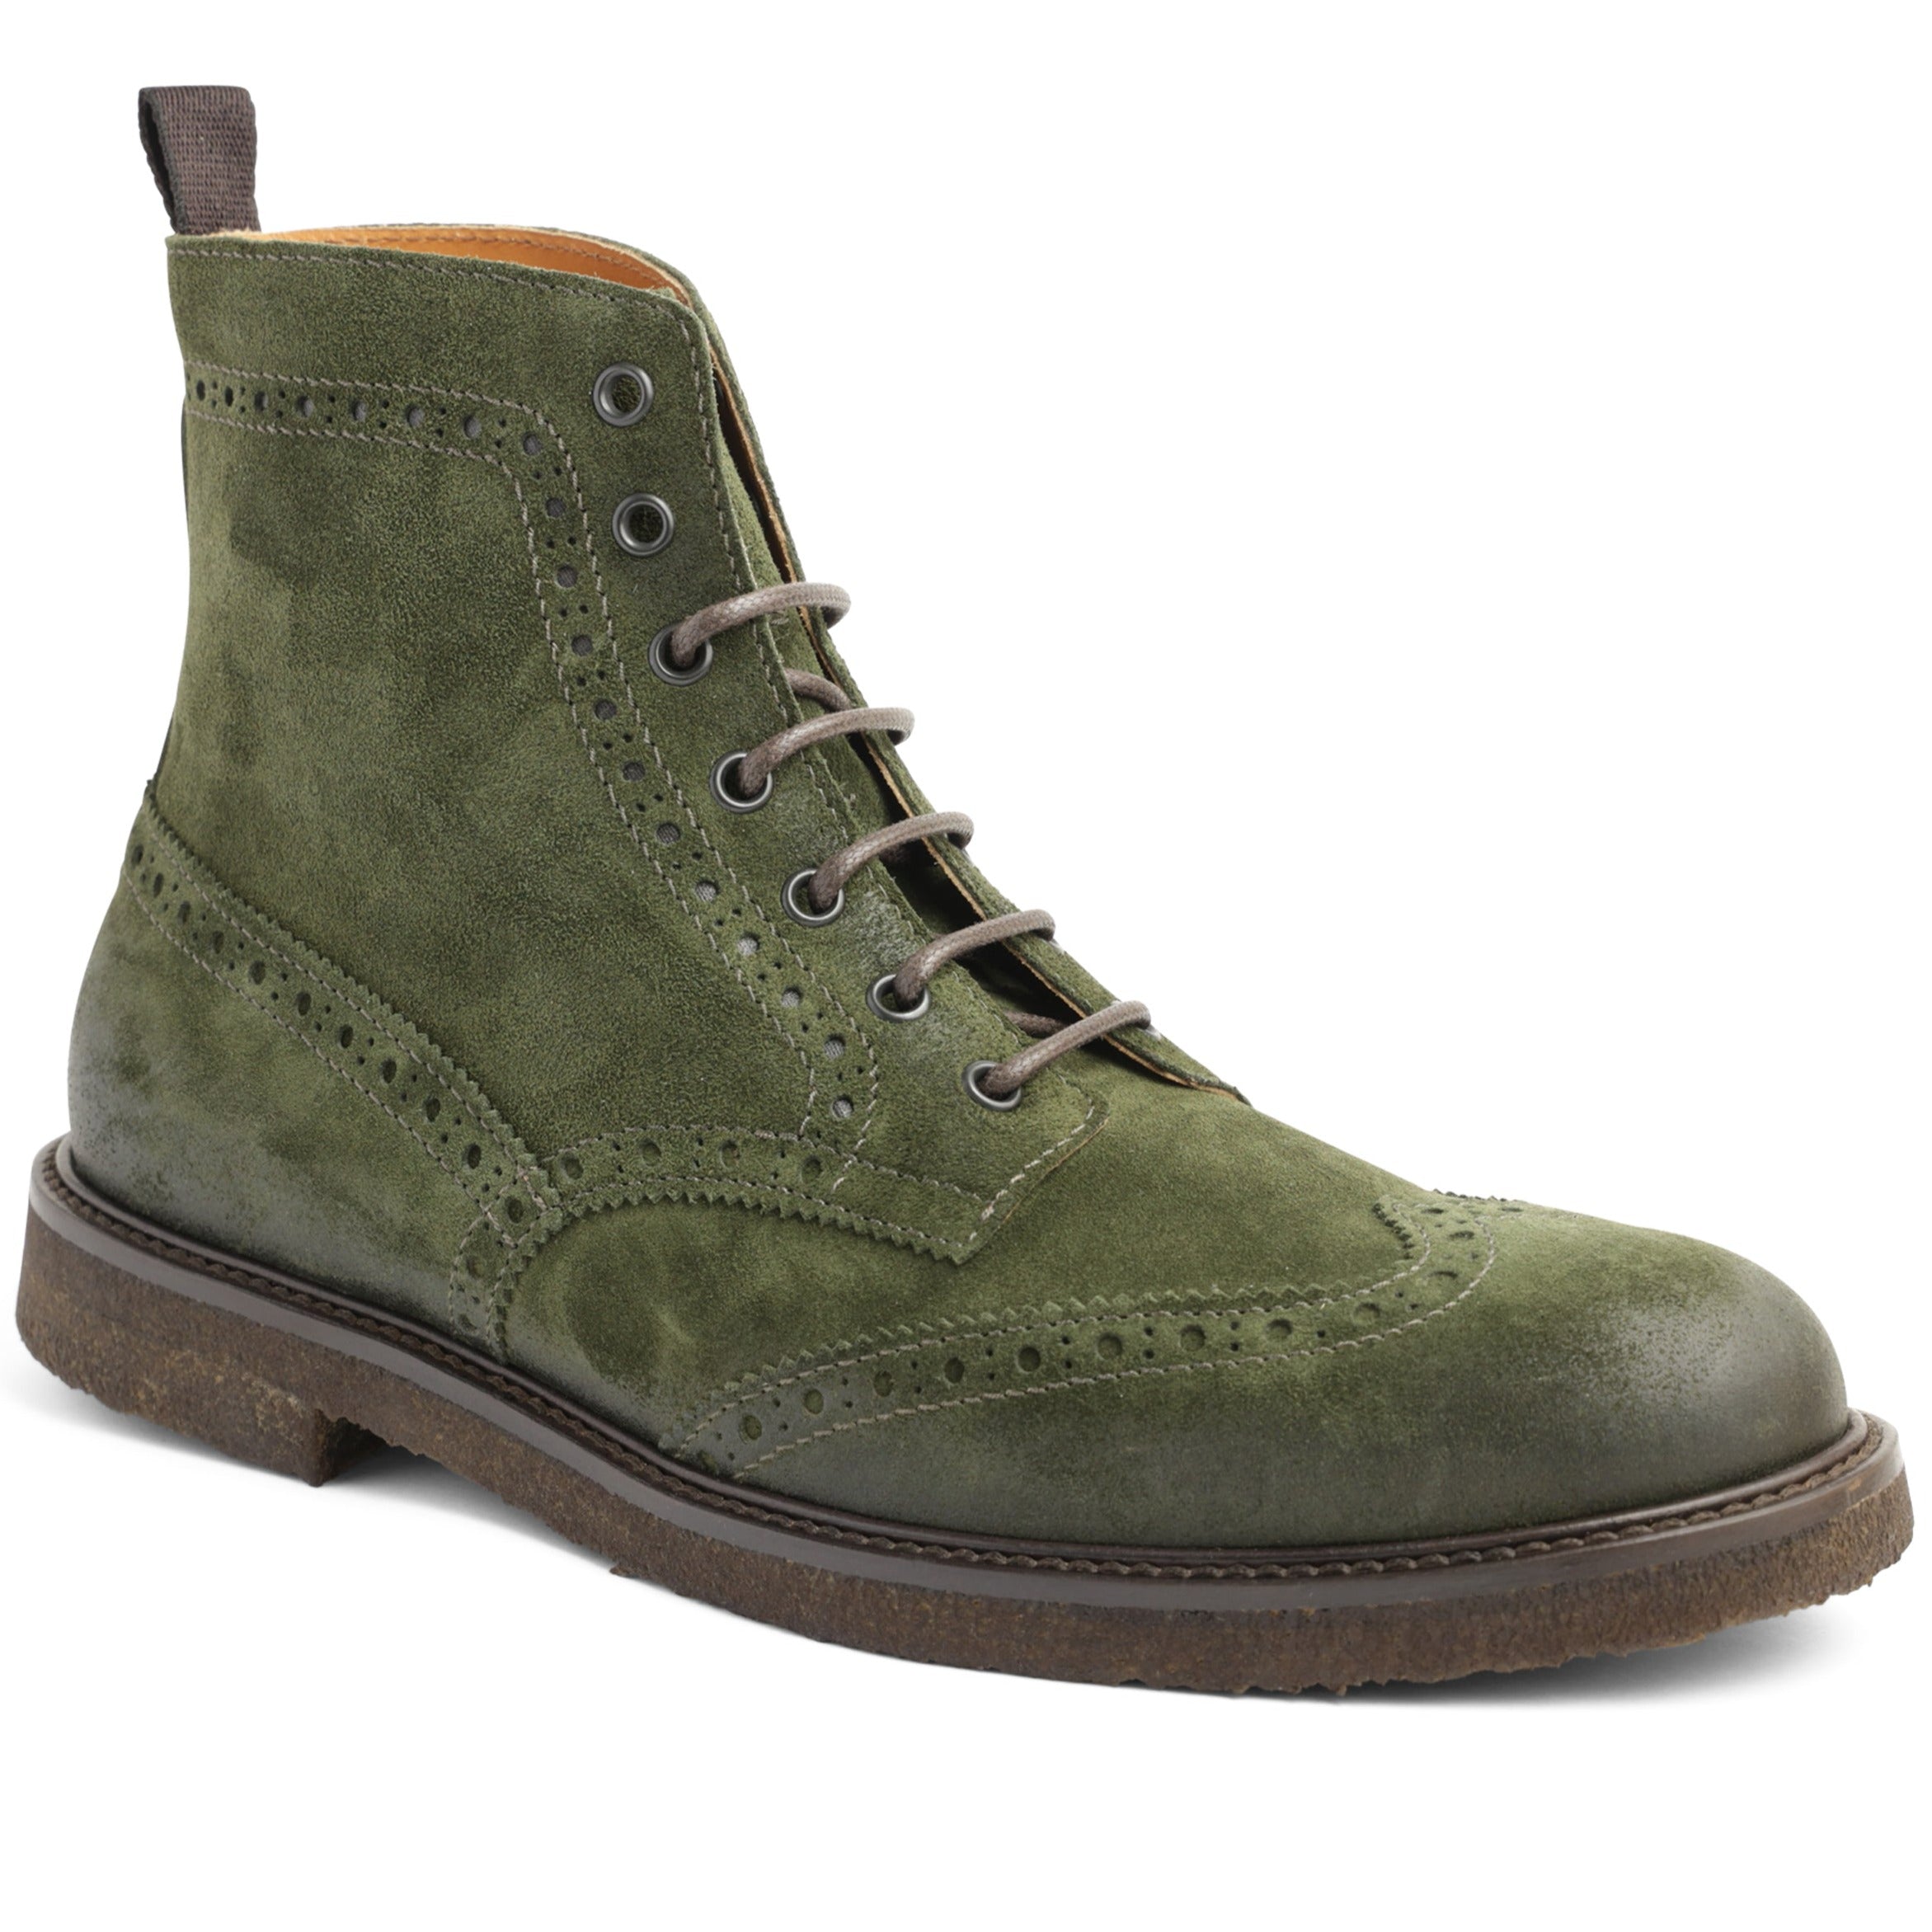 Image of Gleason Wingtip Brogue Suede Oxford Boot - Olive Suede